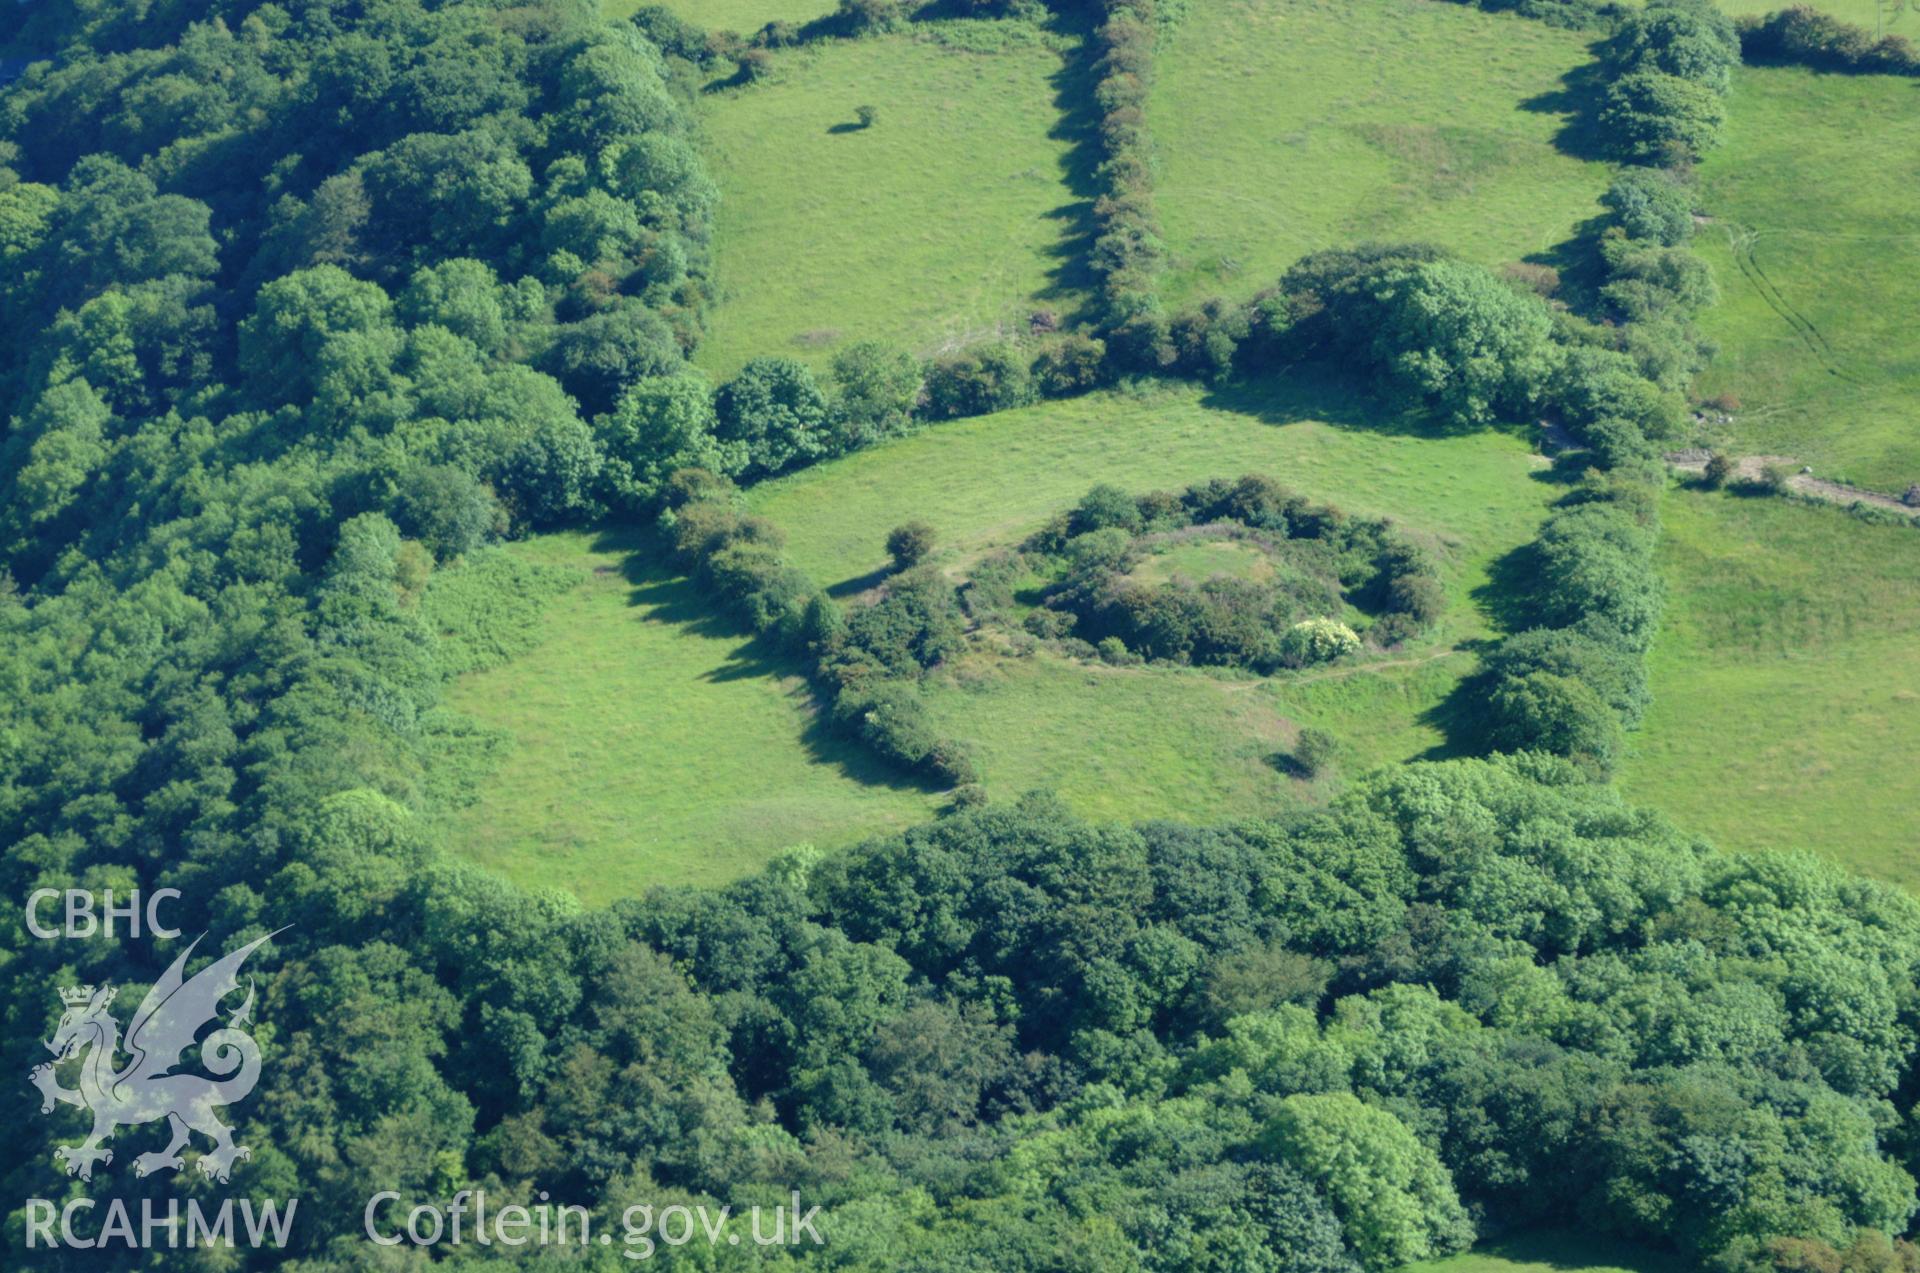 RCAHMW colour oblique aerial photograph of Castell Gwallter, Llandre taken on 14/06/2004 by Toby Driver